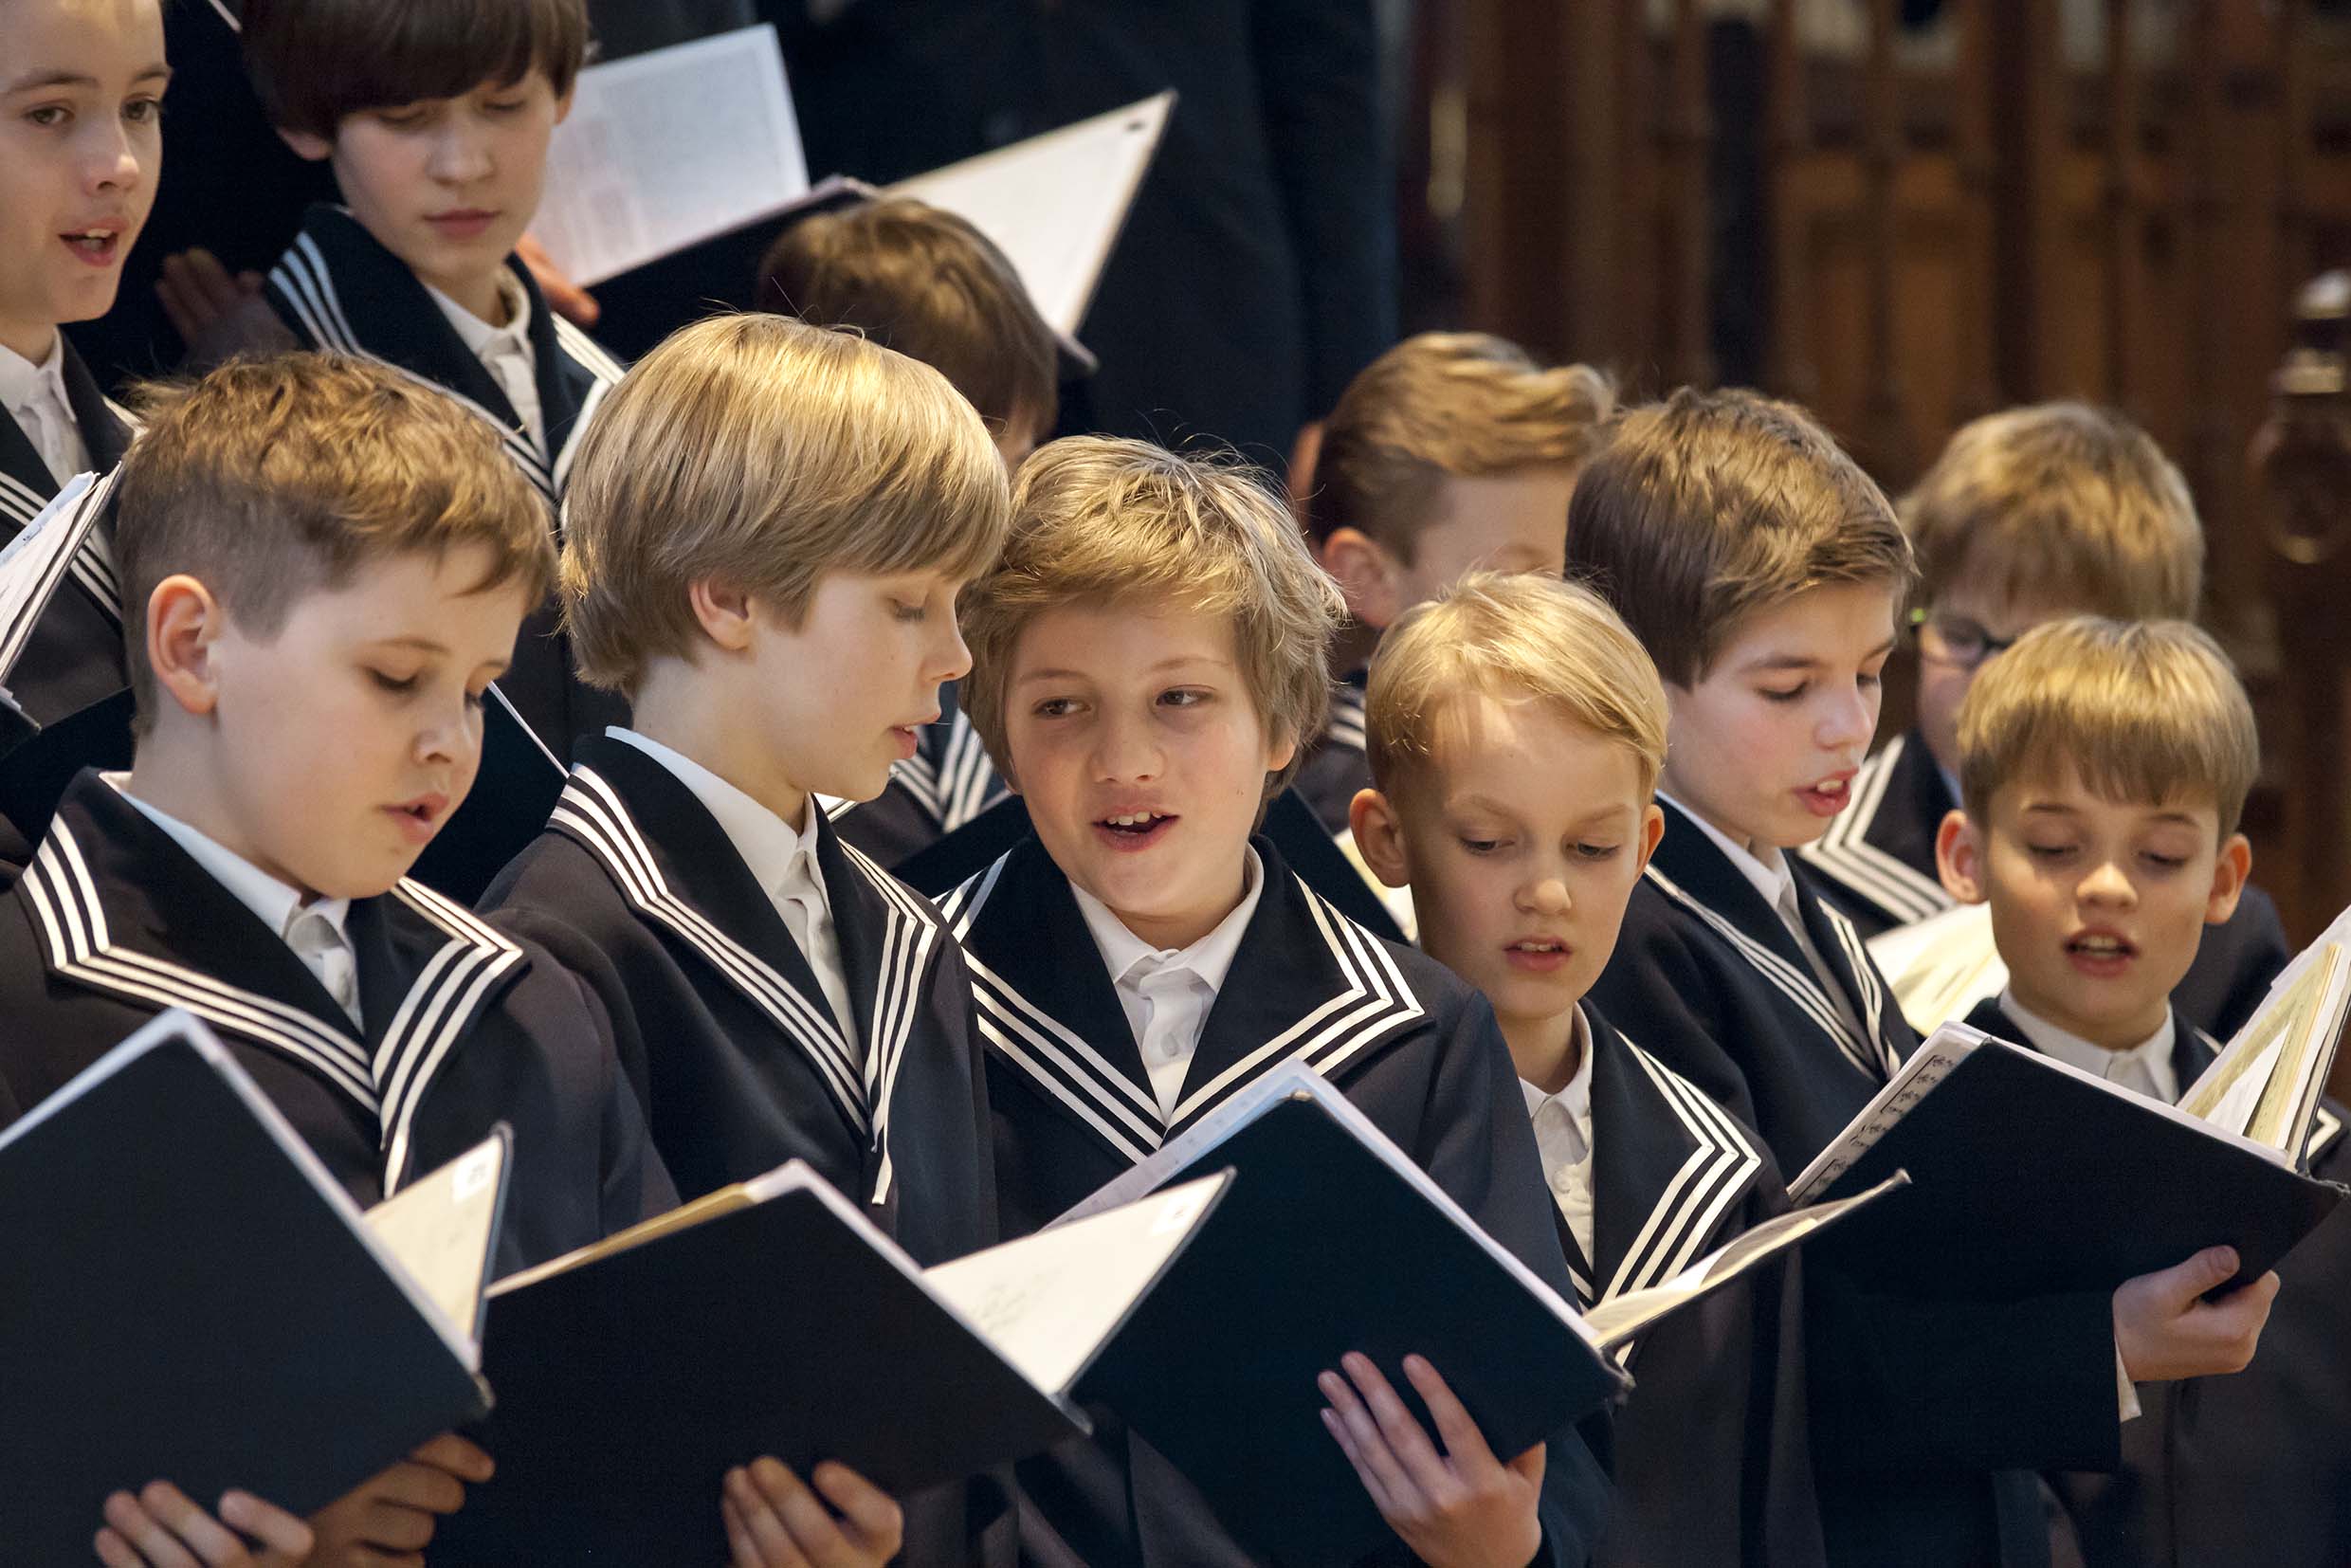 Young members of the Thomanerchor performing. The Thomanerchor was founded in 1212, and the Thomaskantor is its director, as was Bach from 1723 until his death in 1750.